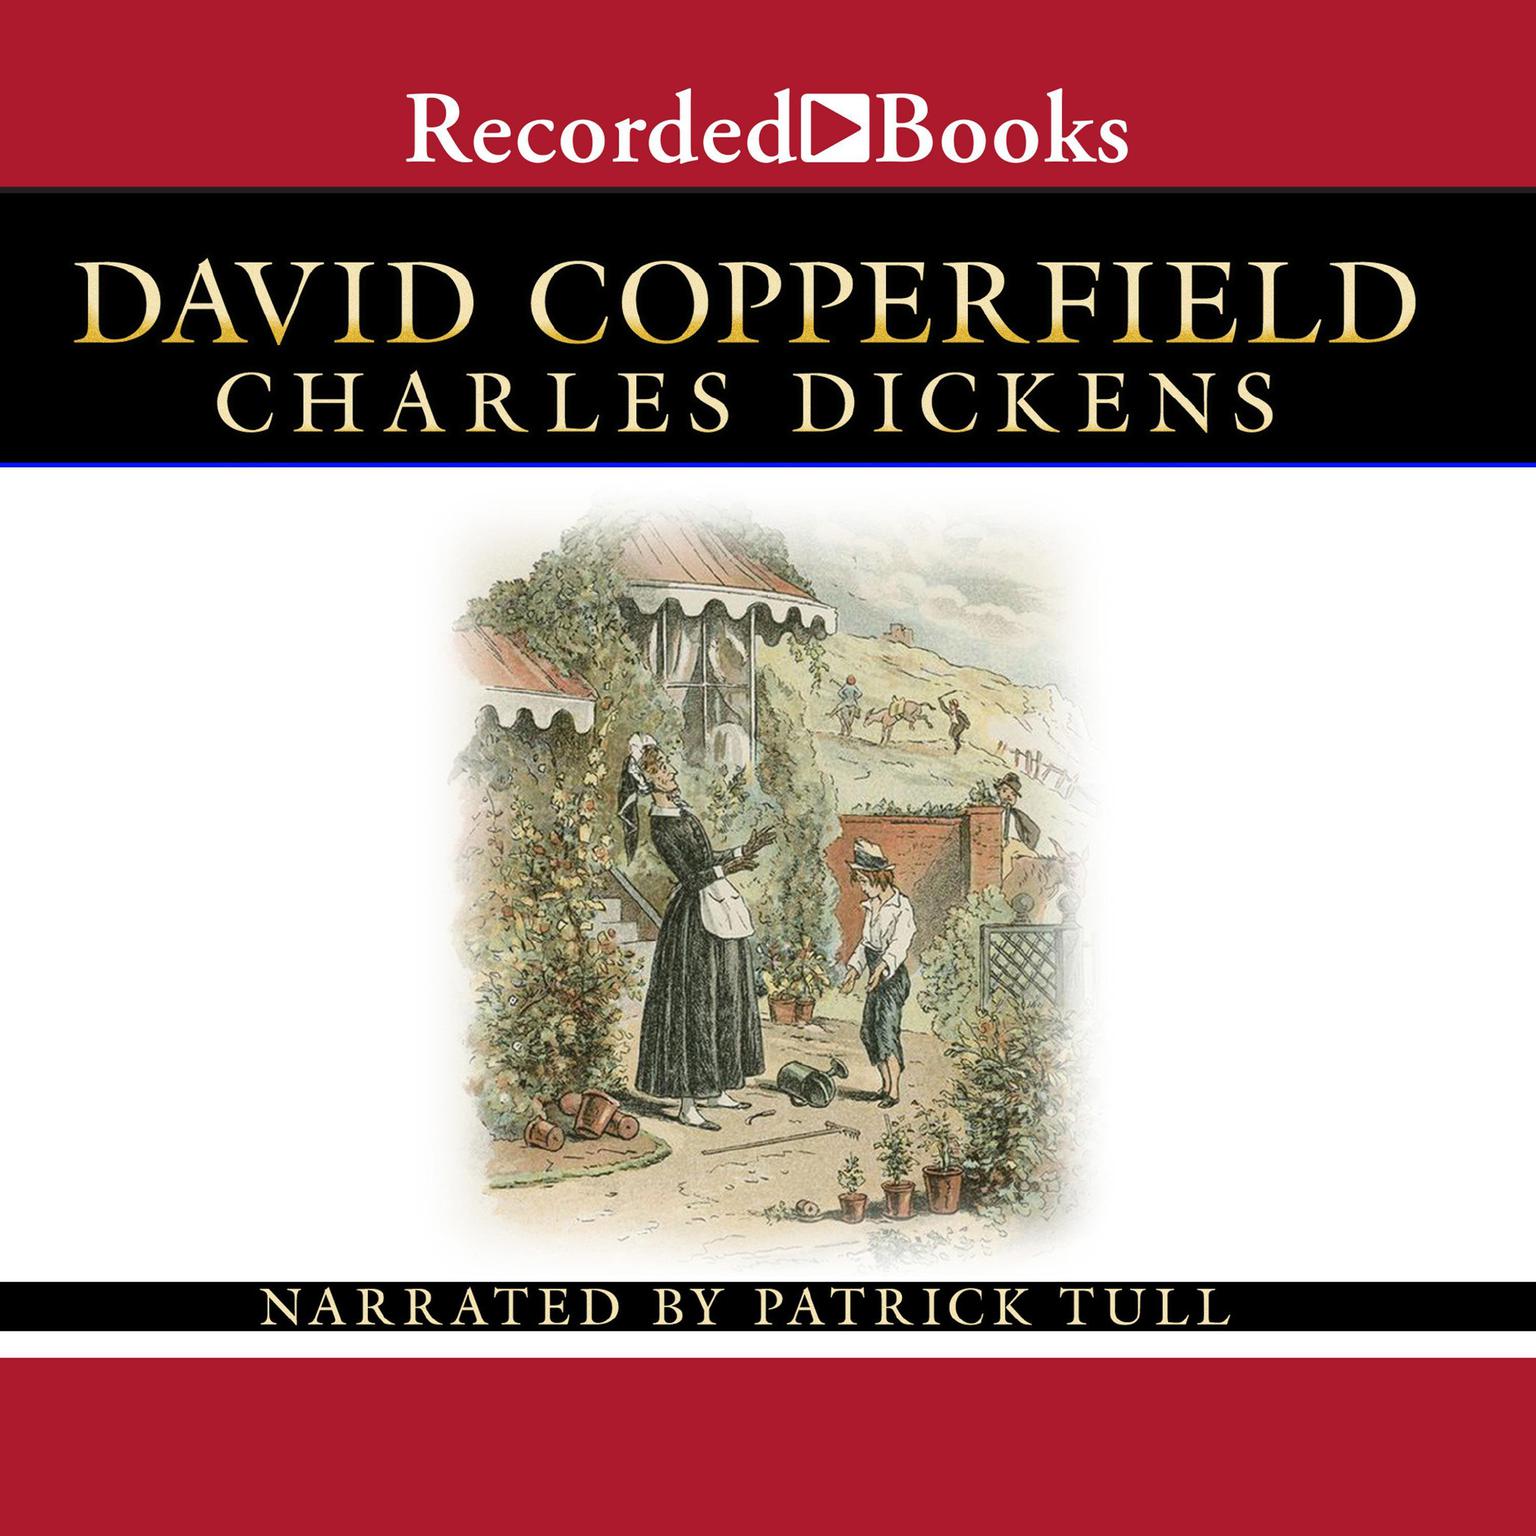 David Copperfield: Part 1 and 2 Audiobook, by Charles Dickens